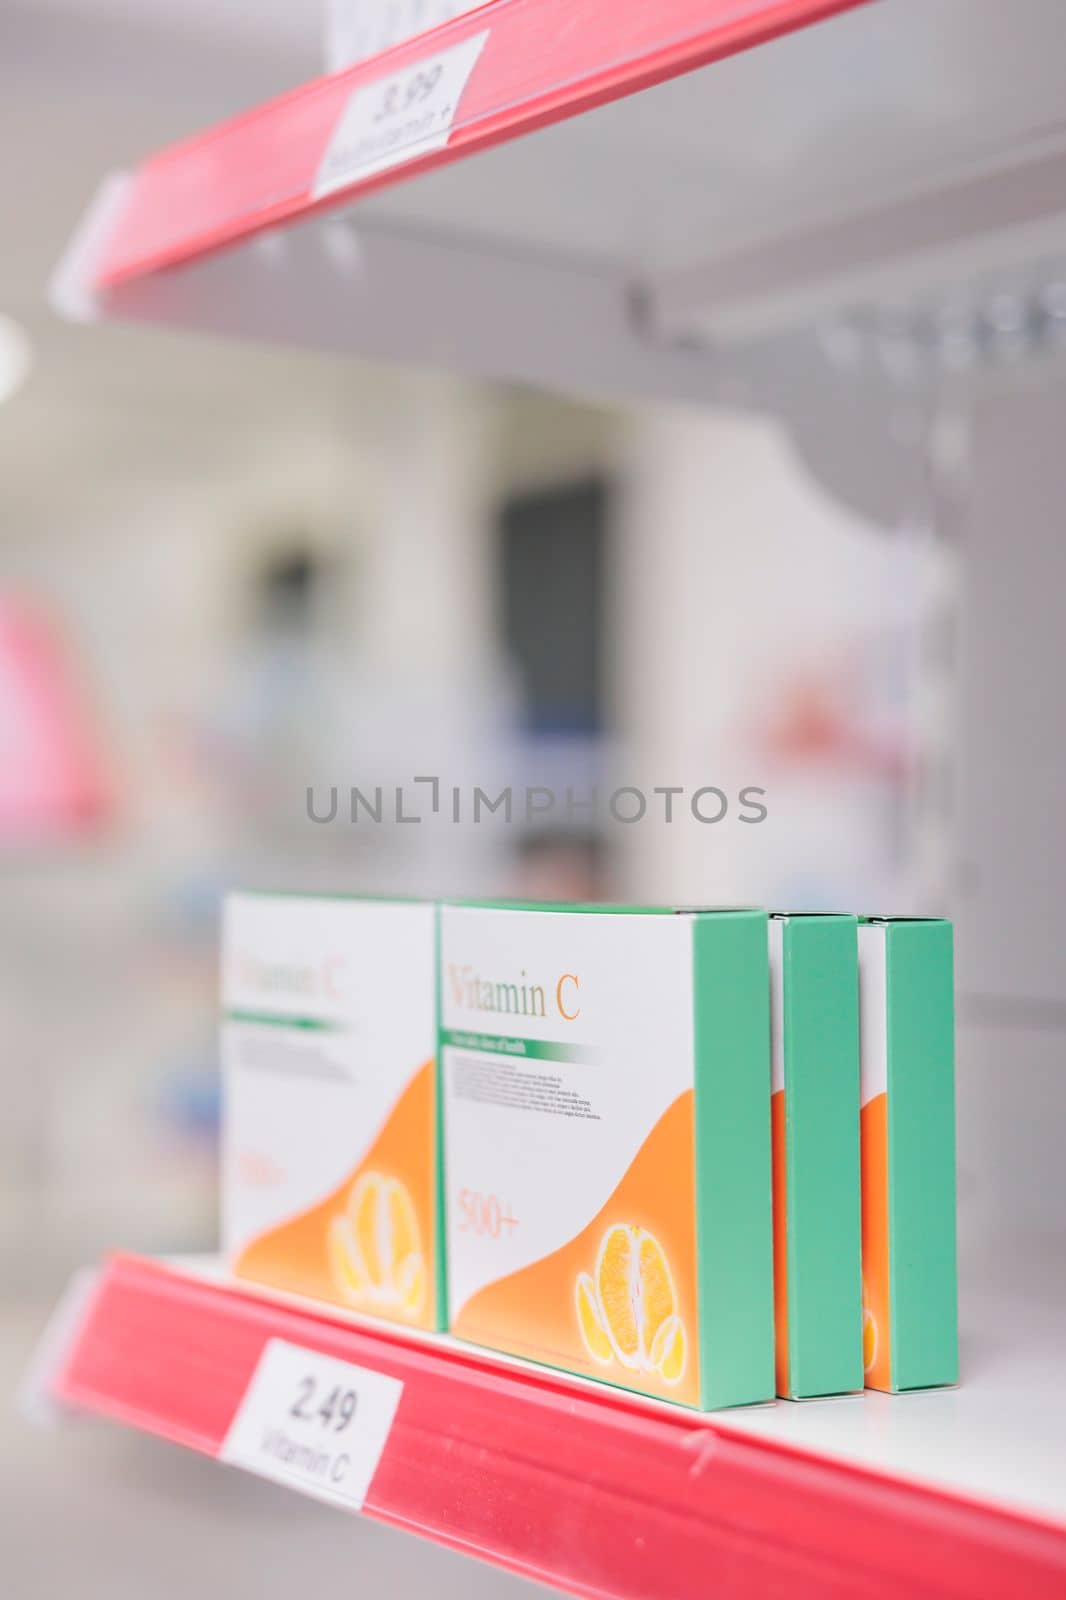 Empty pharmacy shop with cardiology medicaments and treatment on shelves, used by customers to buy healthcare pills and pharmaceutical products. Drugstore with supplements, medication and drugs.